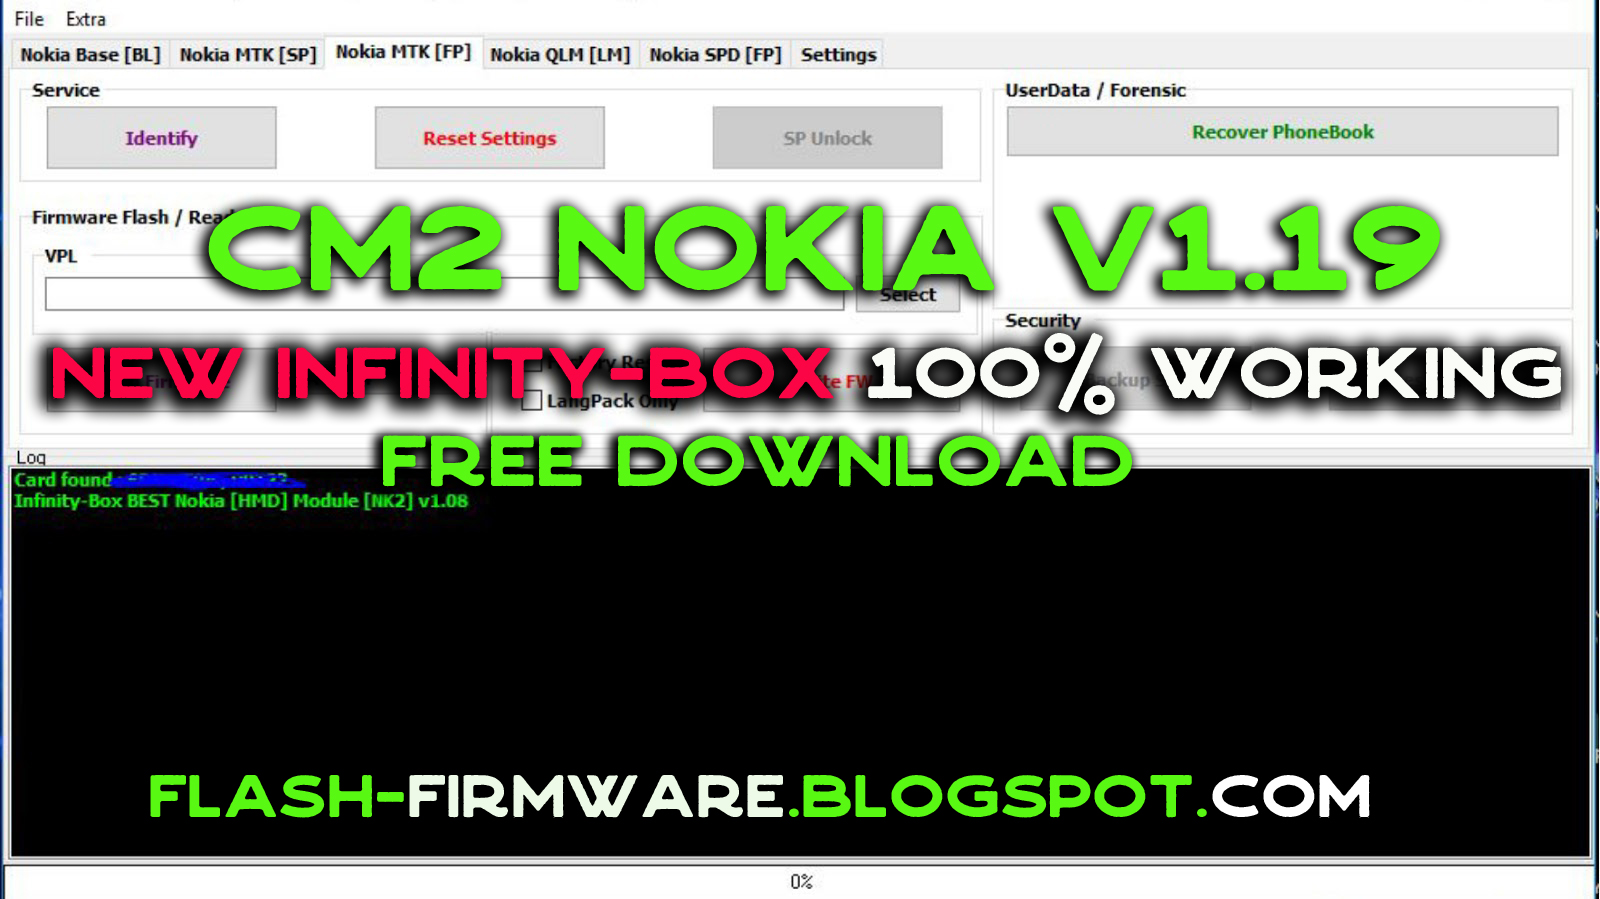 Cm2 Nokia V1 19 New Infinity Box 100 Working Free Download Gsmbox Flash Tool Usbdriver Root Unlock Tool Frp We 5000 Article Search Bx